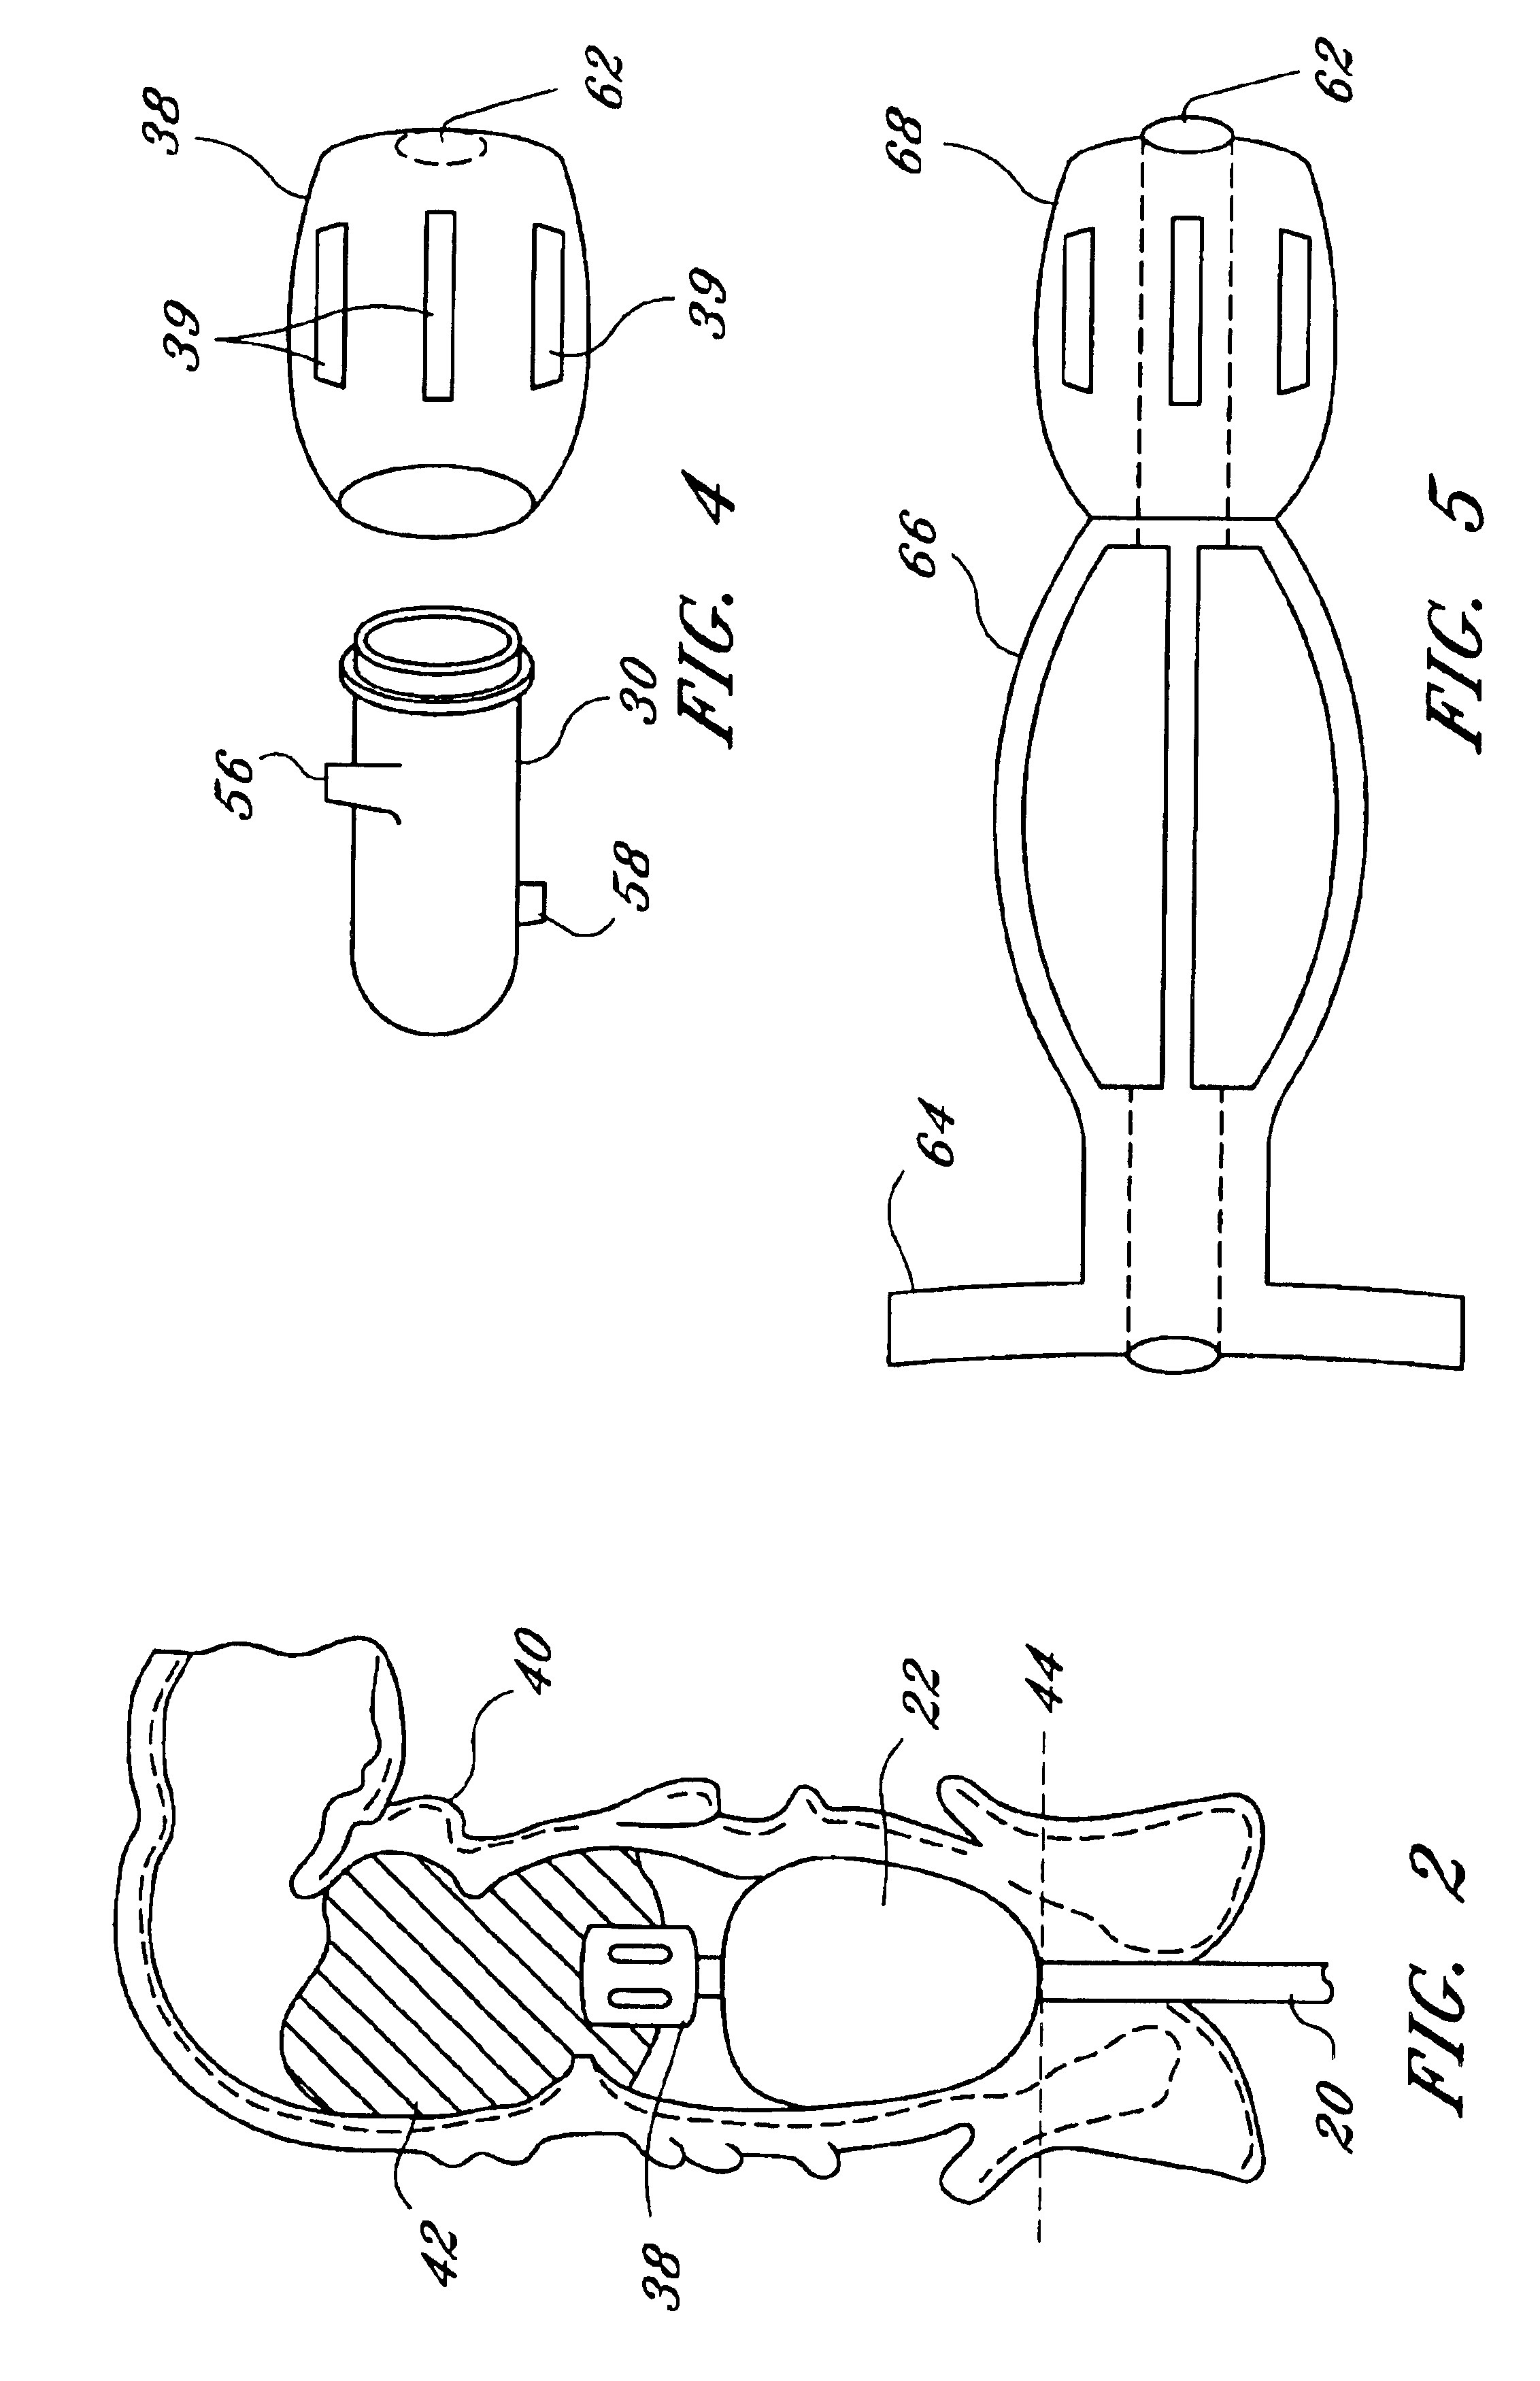 Fecal incontinence management device